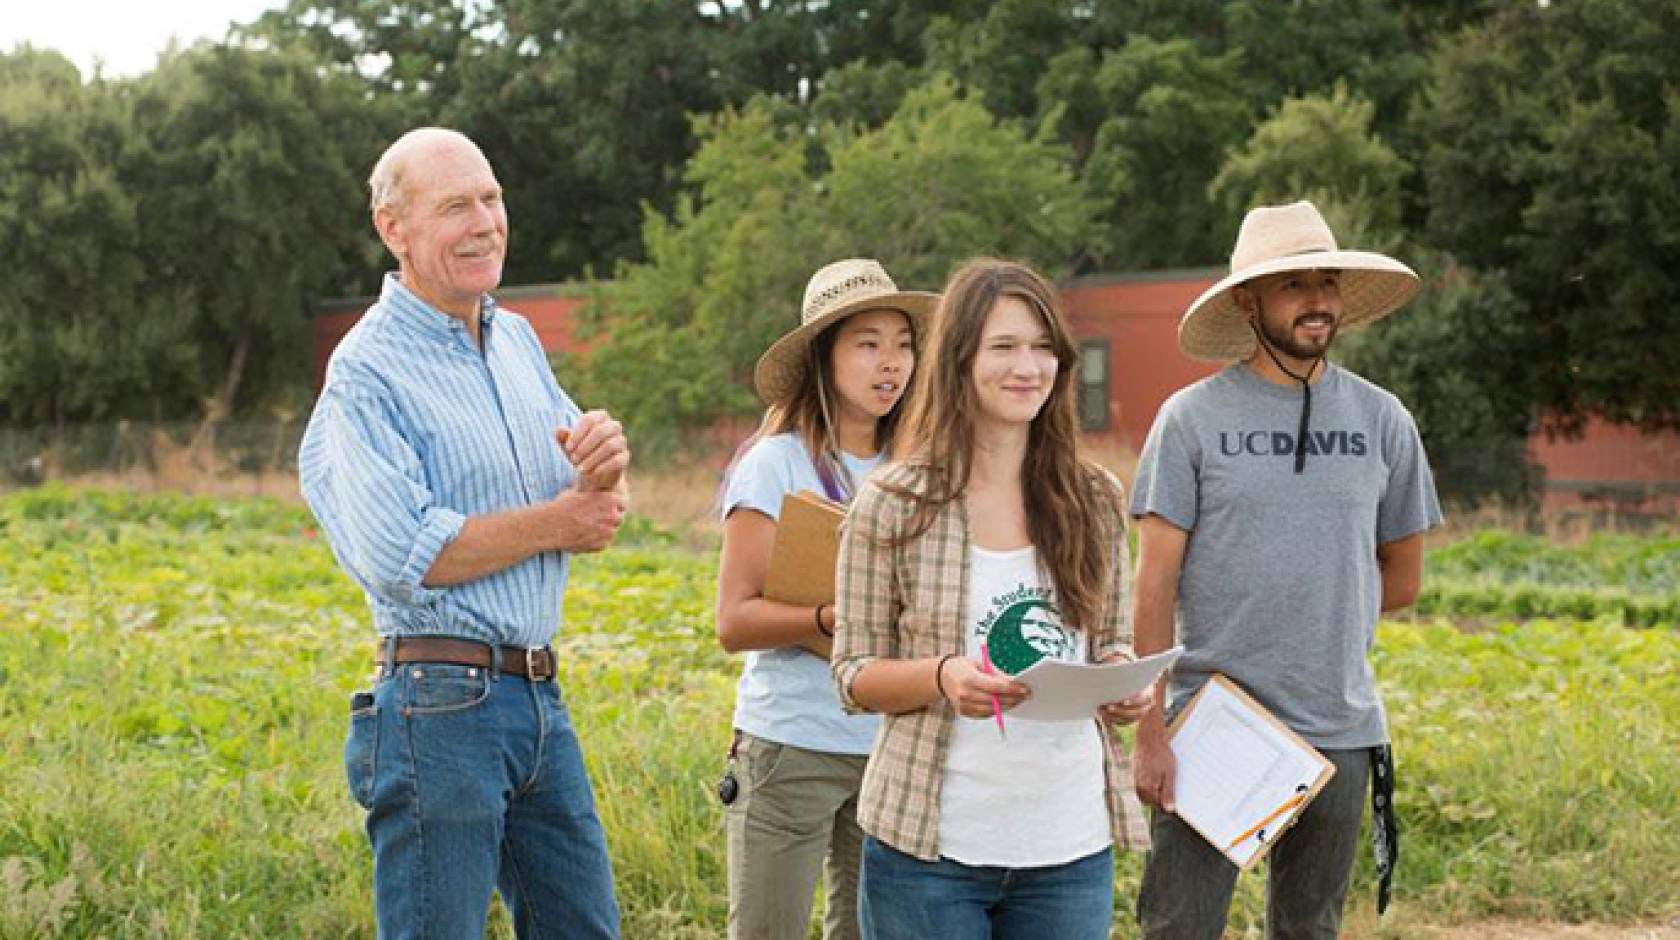 UC Davis Student Farm Director Mark Van Horn and some of his students last year, from left, Alexis Fujii, Mary Laurie and Abraham Cazares. 